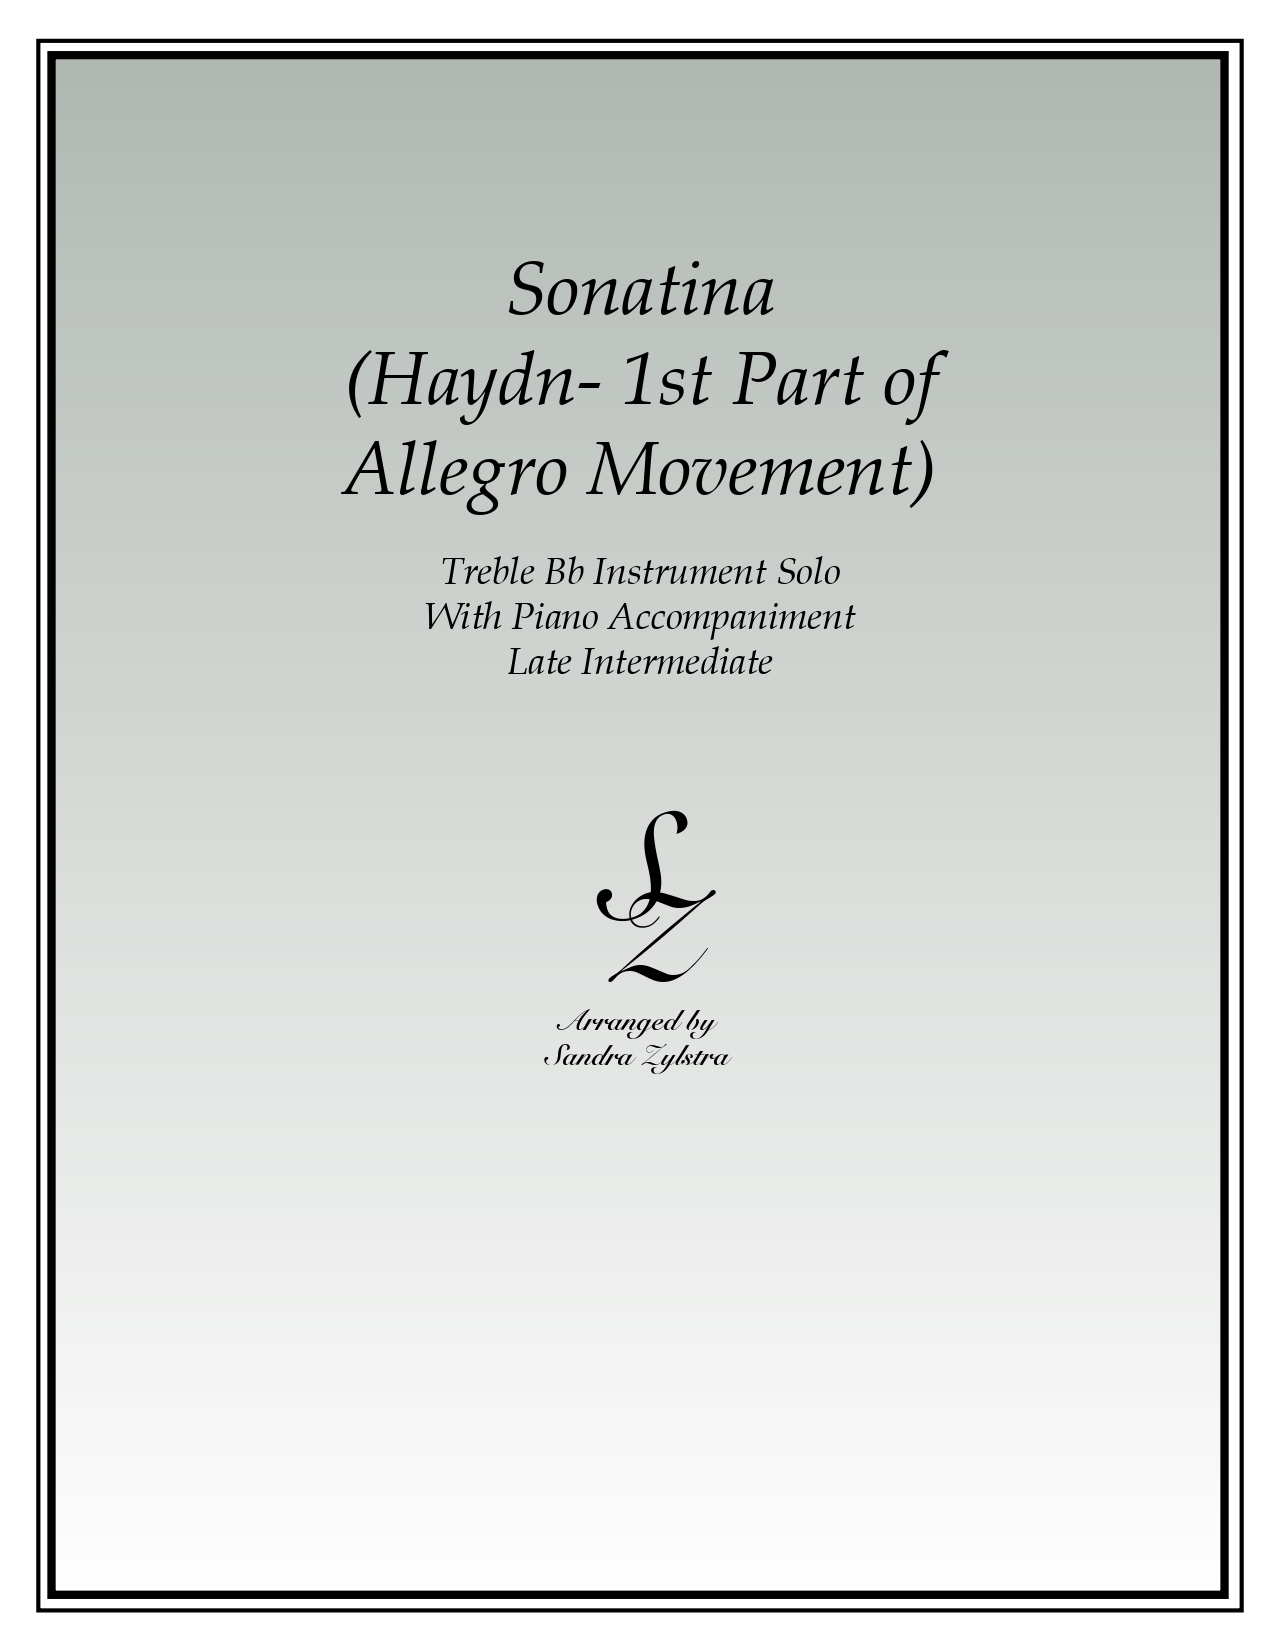 Sonatina Haydn Bb instrument solo part cover page 00011